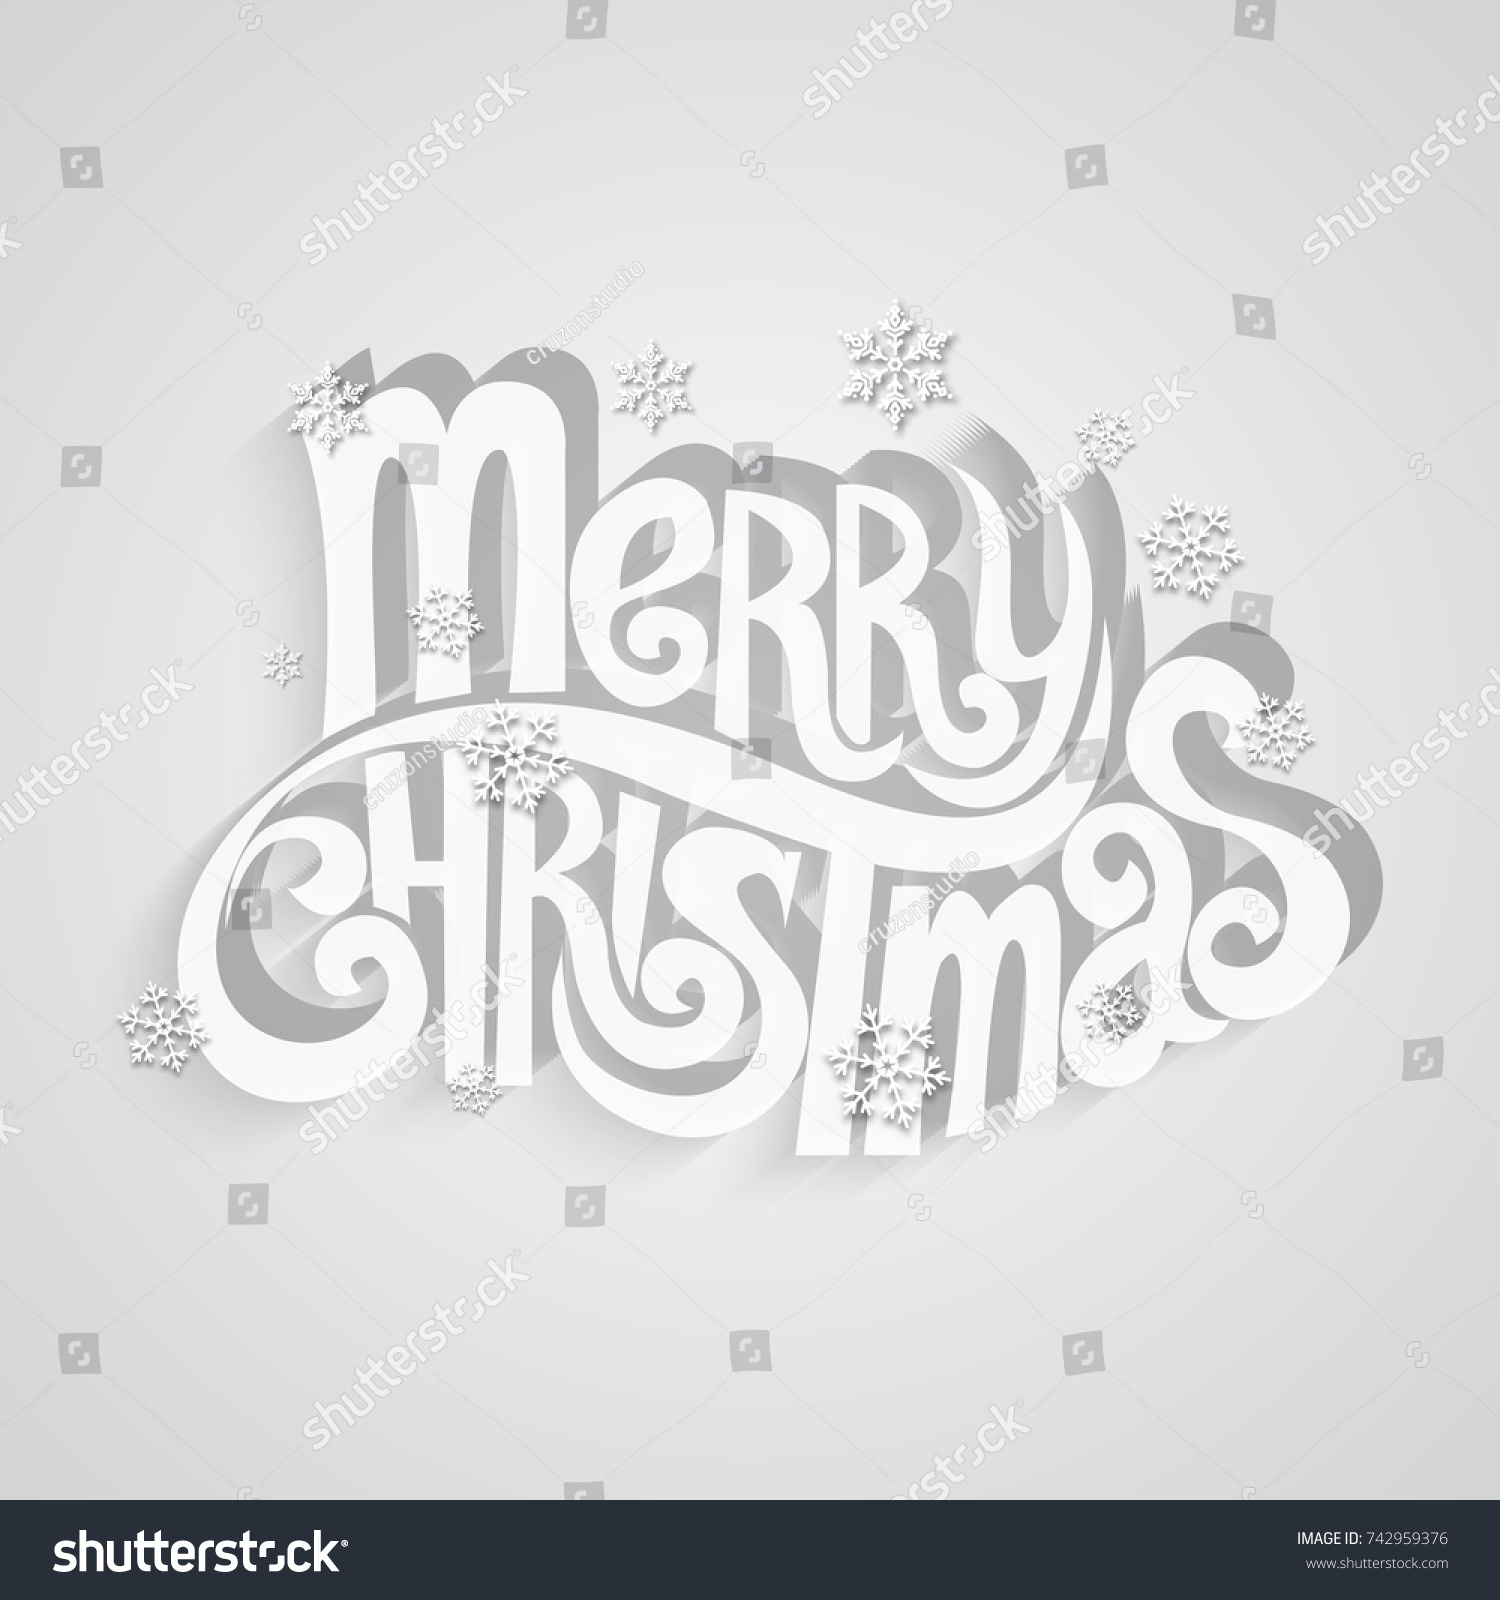 Christmas Greeting Card. Merry Christmas lettering with Christmas tree, vector illustration. #742959376